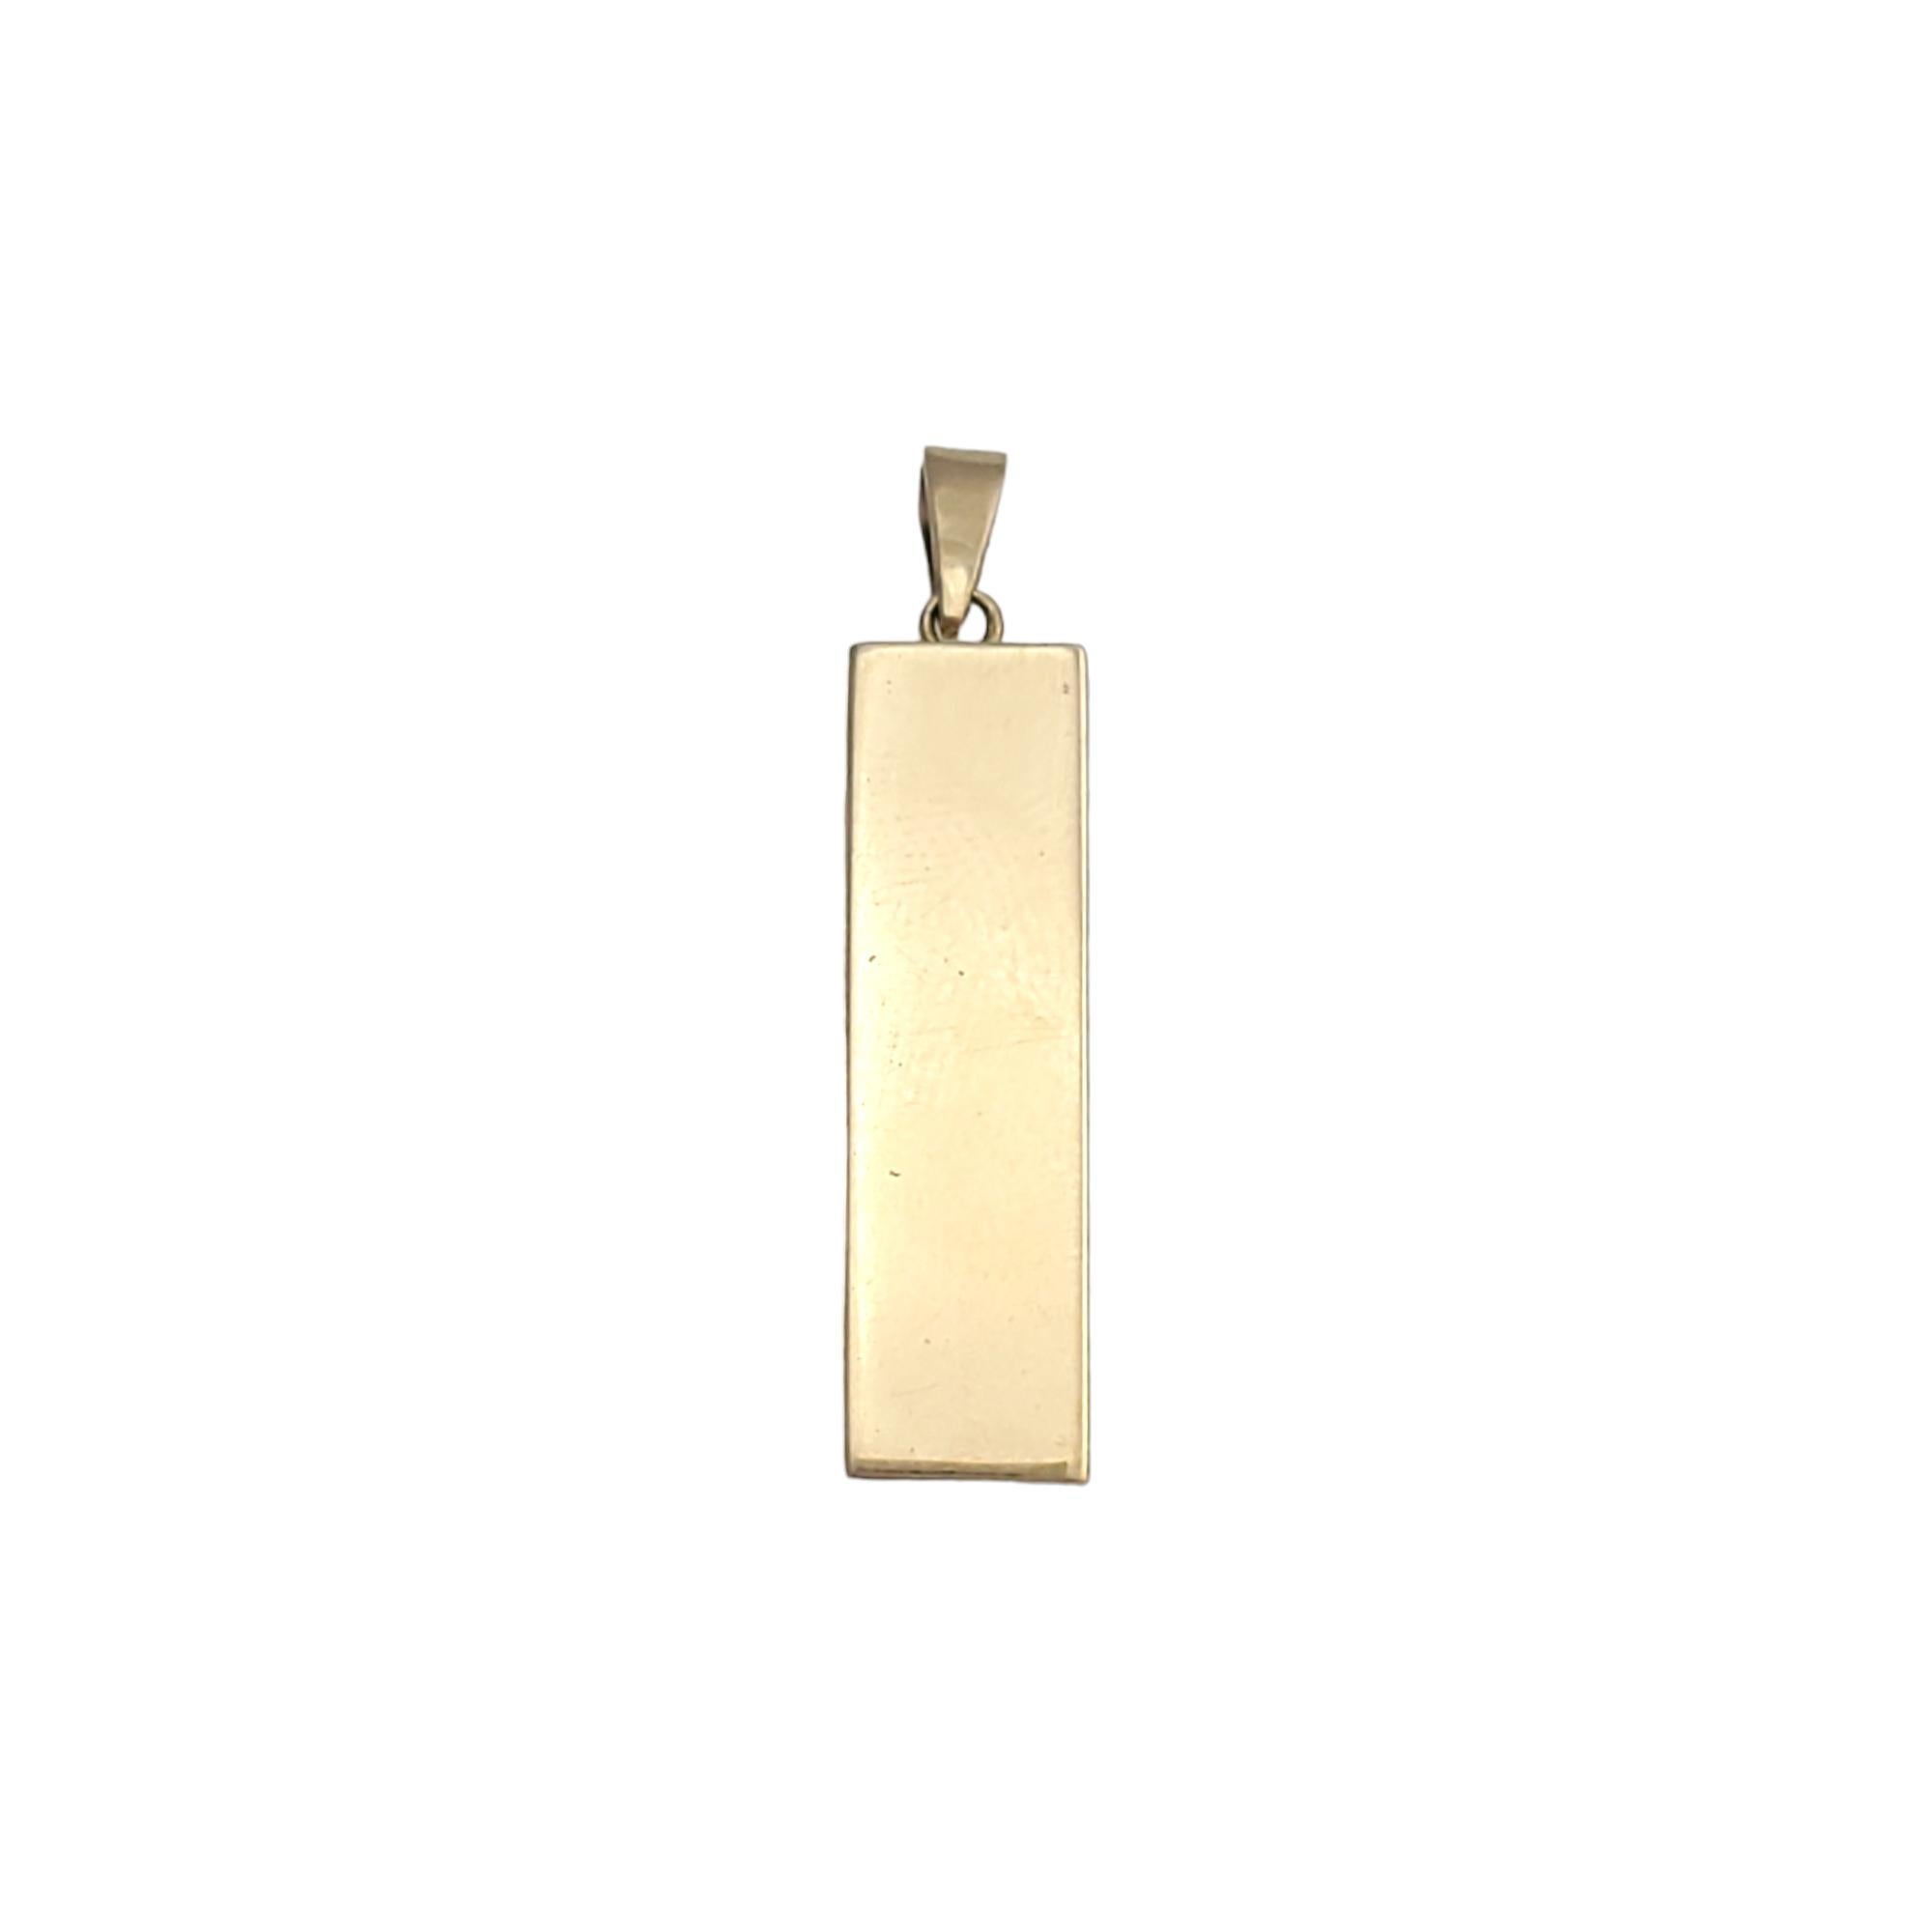 Vintage 14 karat yellow gold miraculous medal pendant -

This lovely mezuzah pendant is a reminder of protection and is set in meticulously detailed 14K yellow gold.

Size: 25.41mm x 5.22mm

Stamped: 14K

Weight: 2.94 gr./ 1.89 dwt.

Chain not